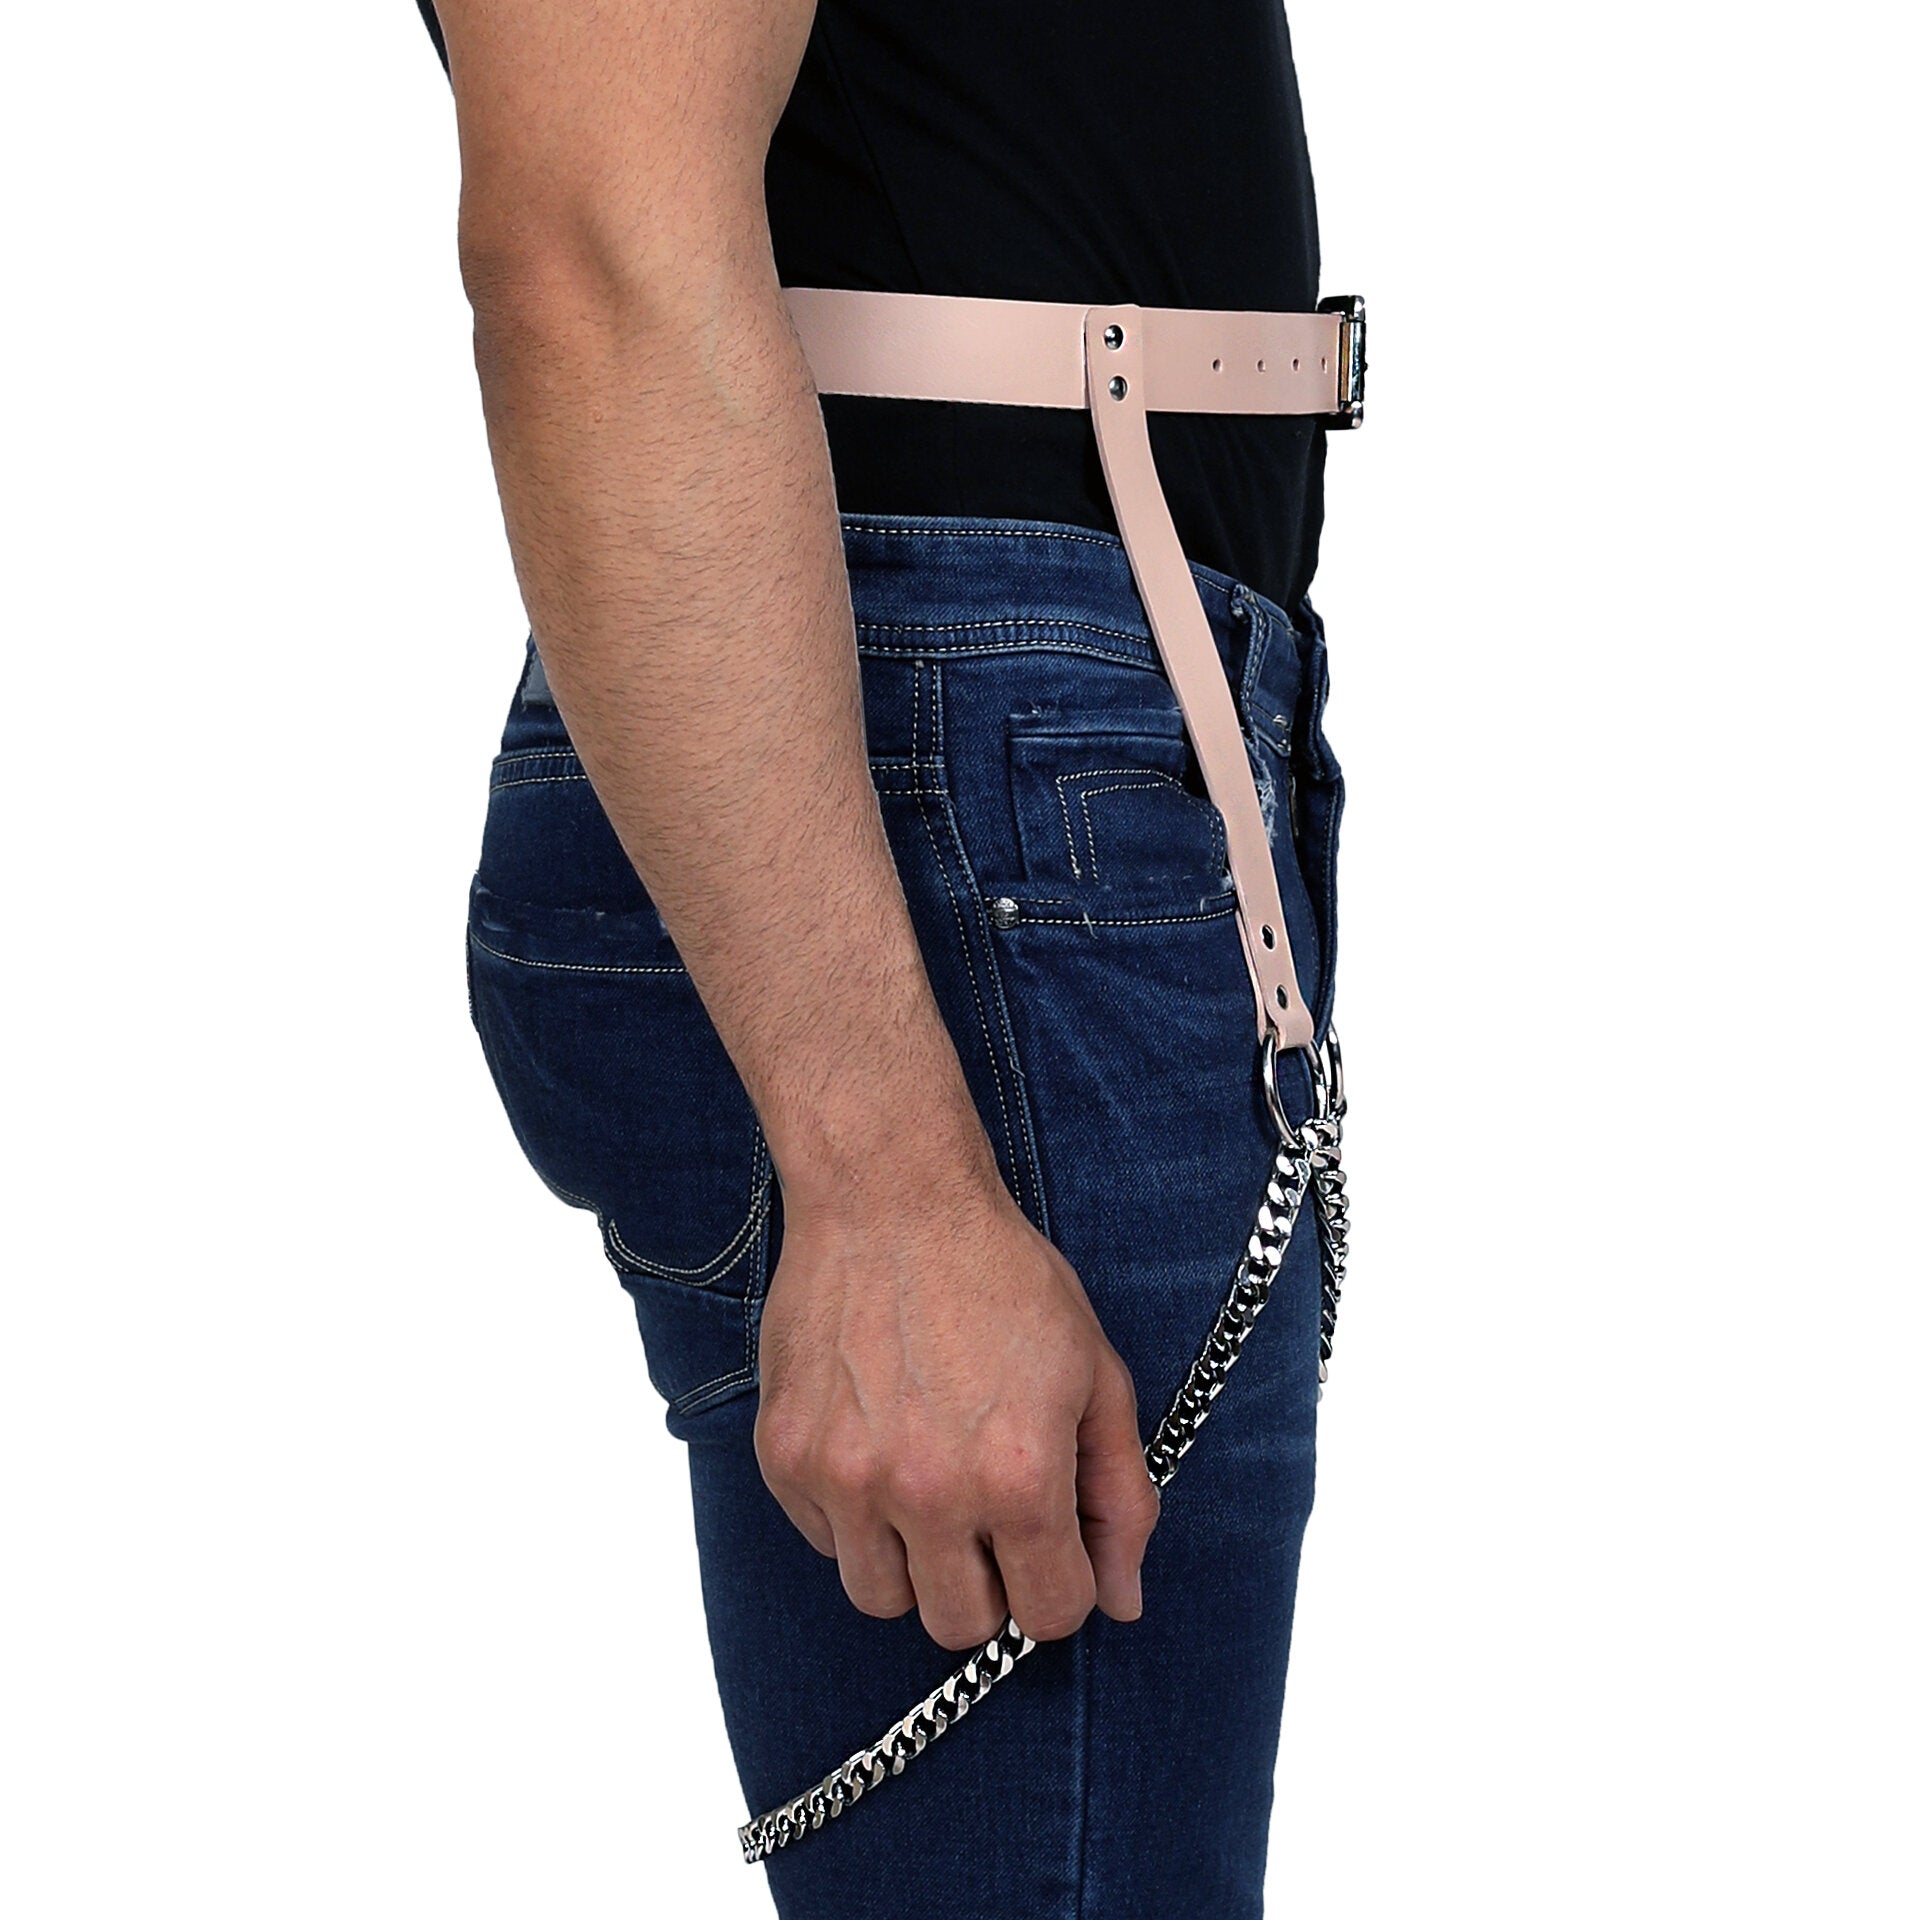 MENS THIGH CHAIN SUSPENDER - Subculture